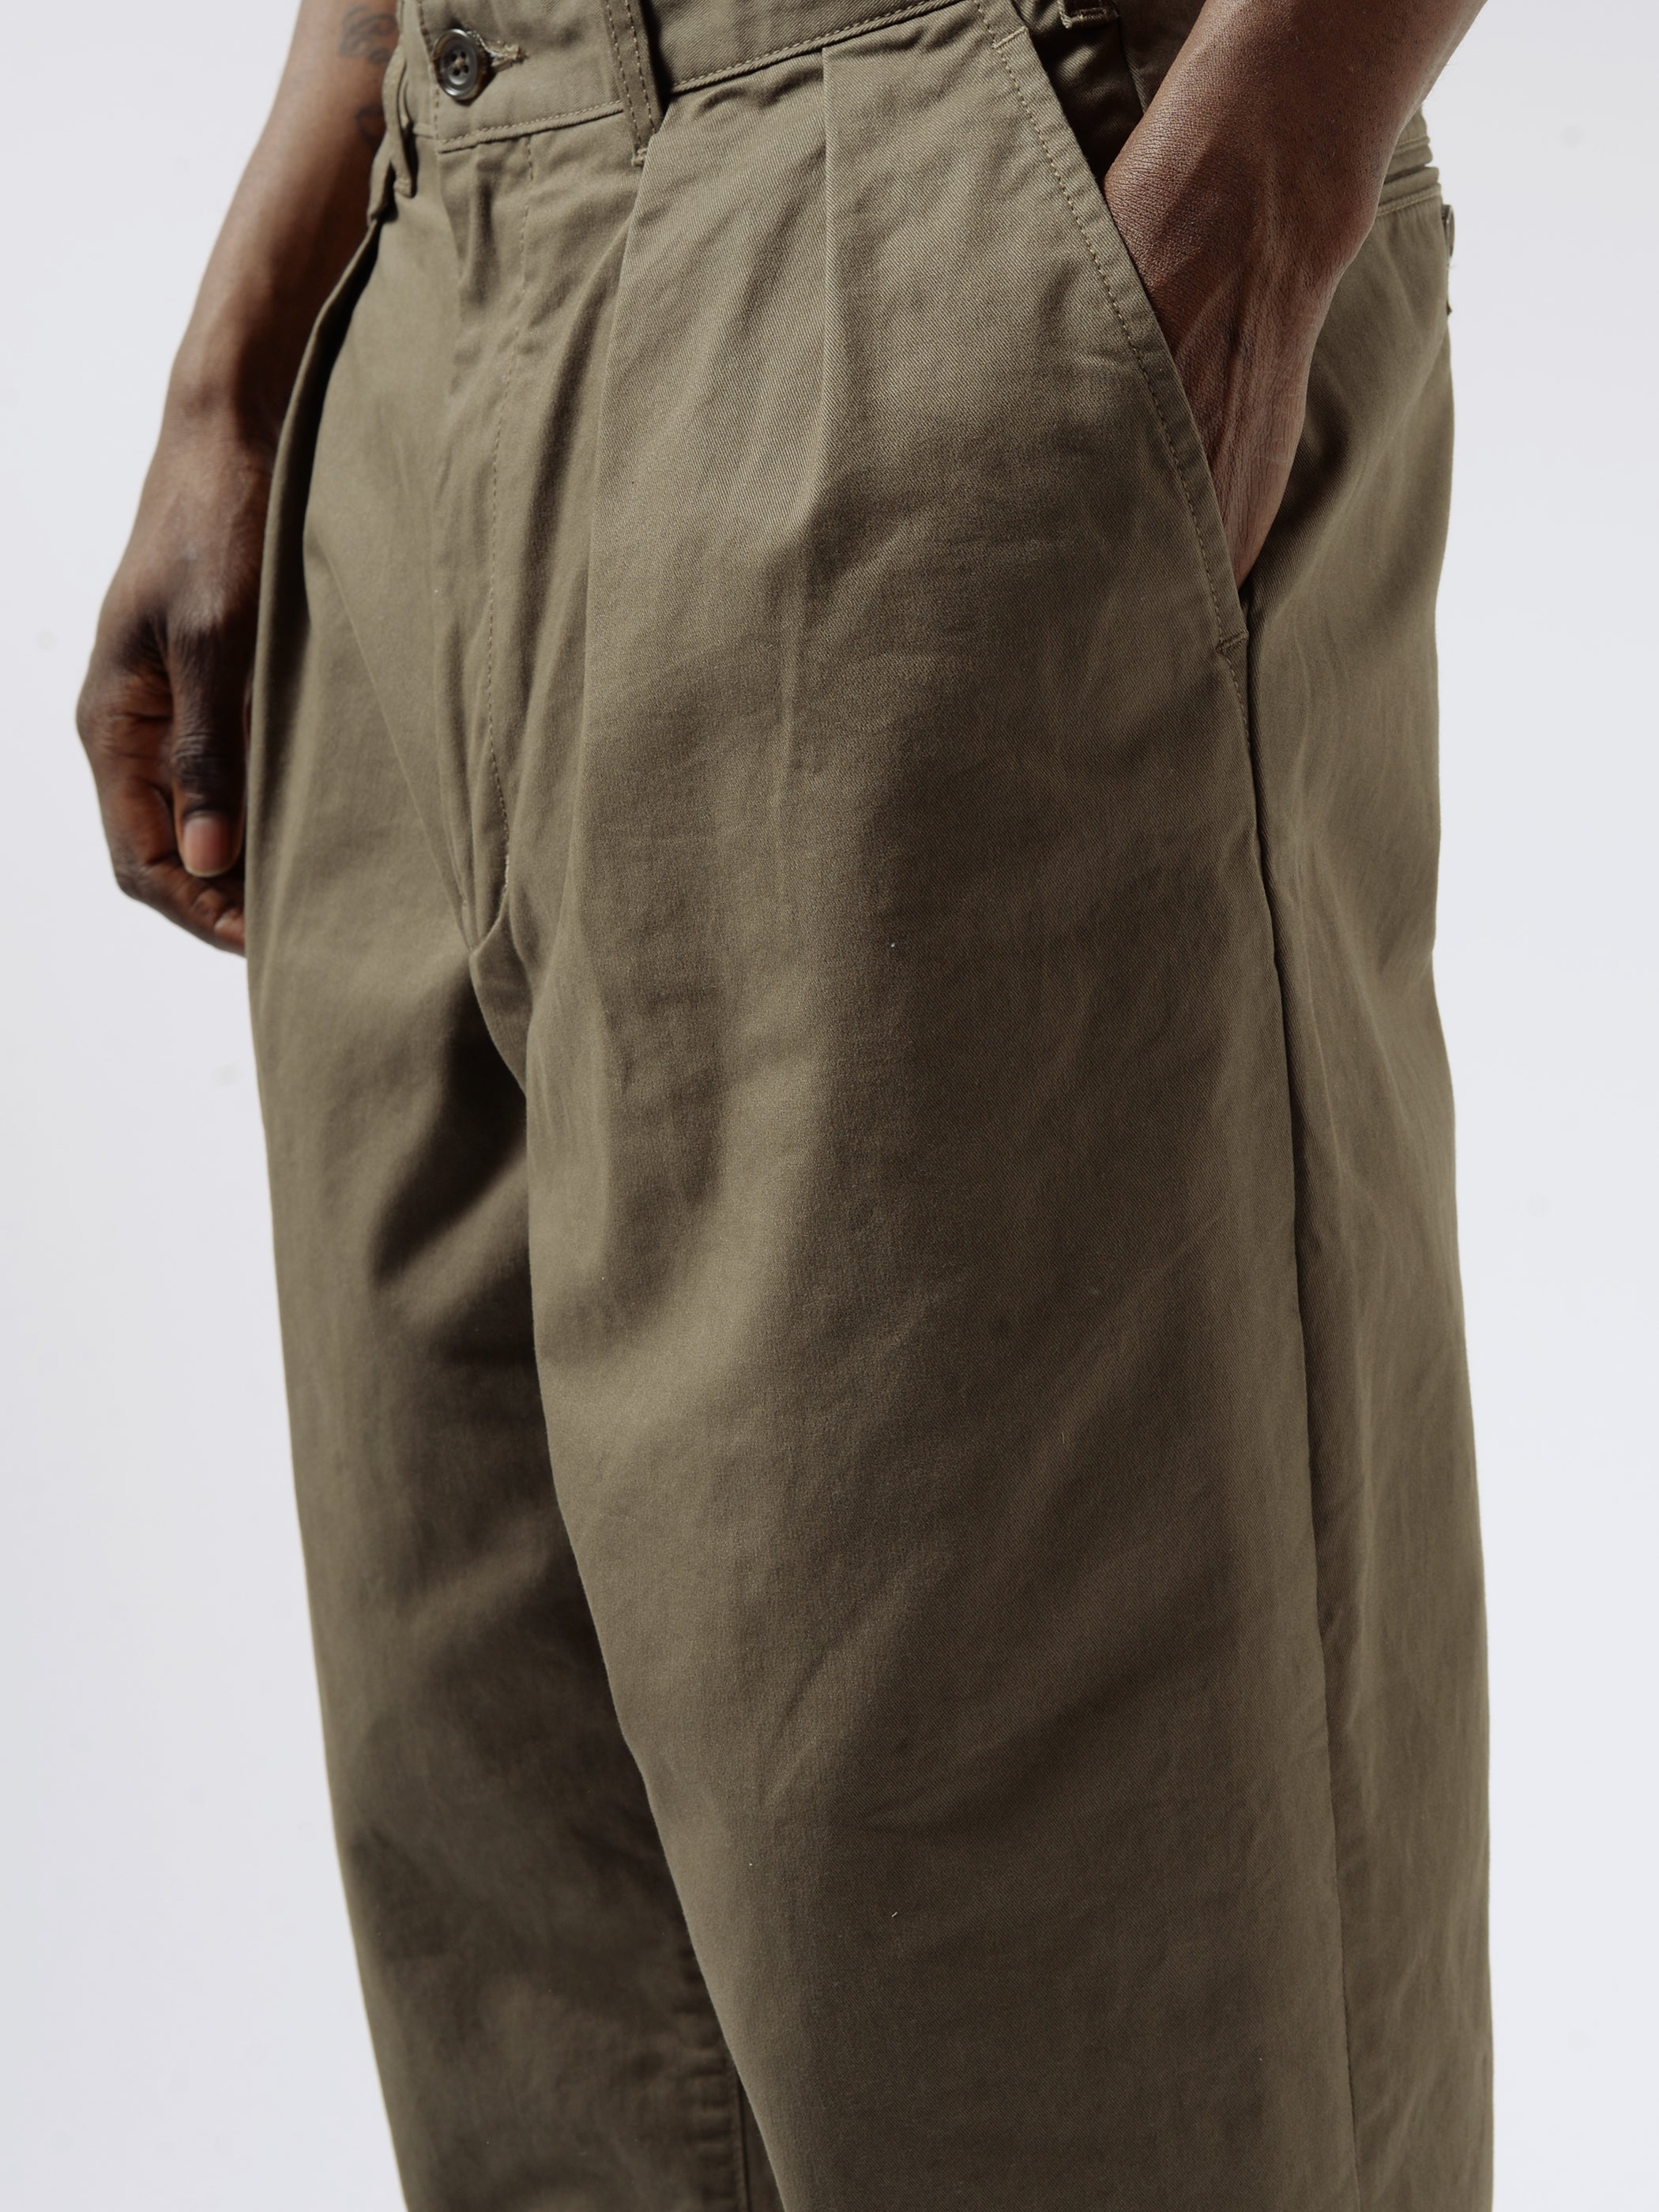 BEAMS PLUS - 2 Pleat Chino in Olive – gravitypope